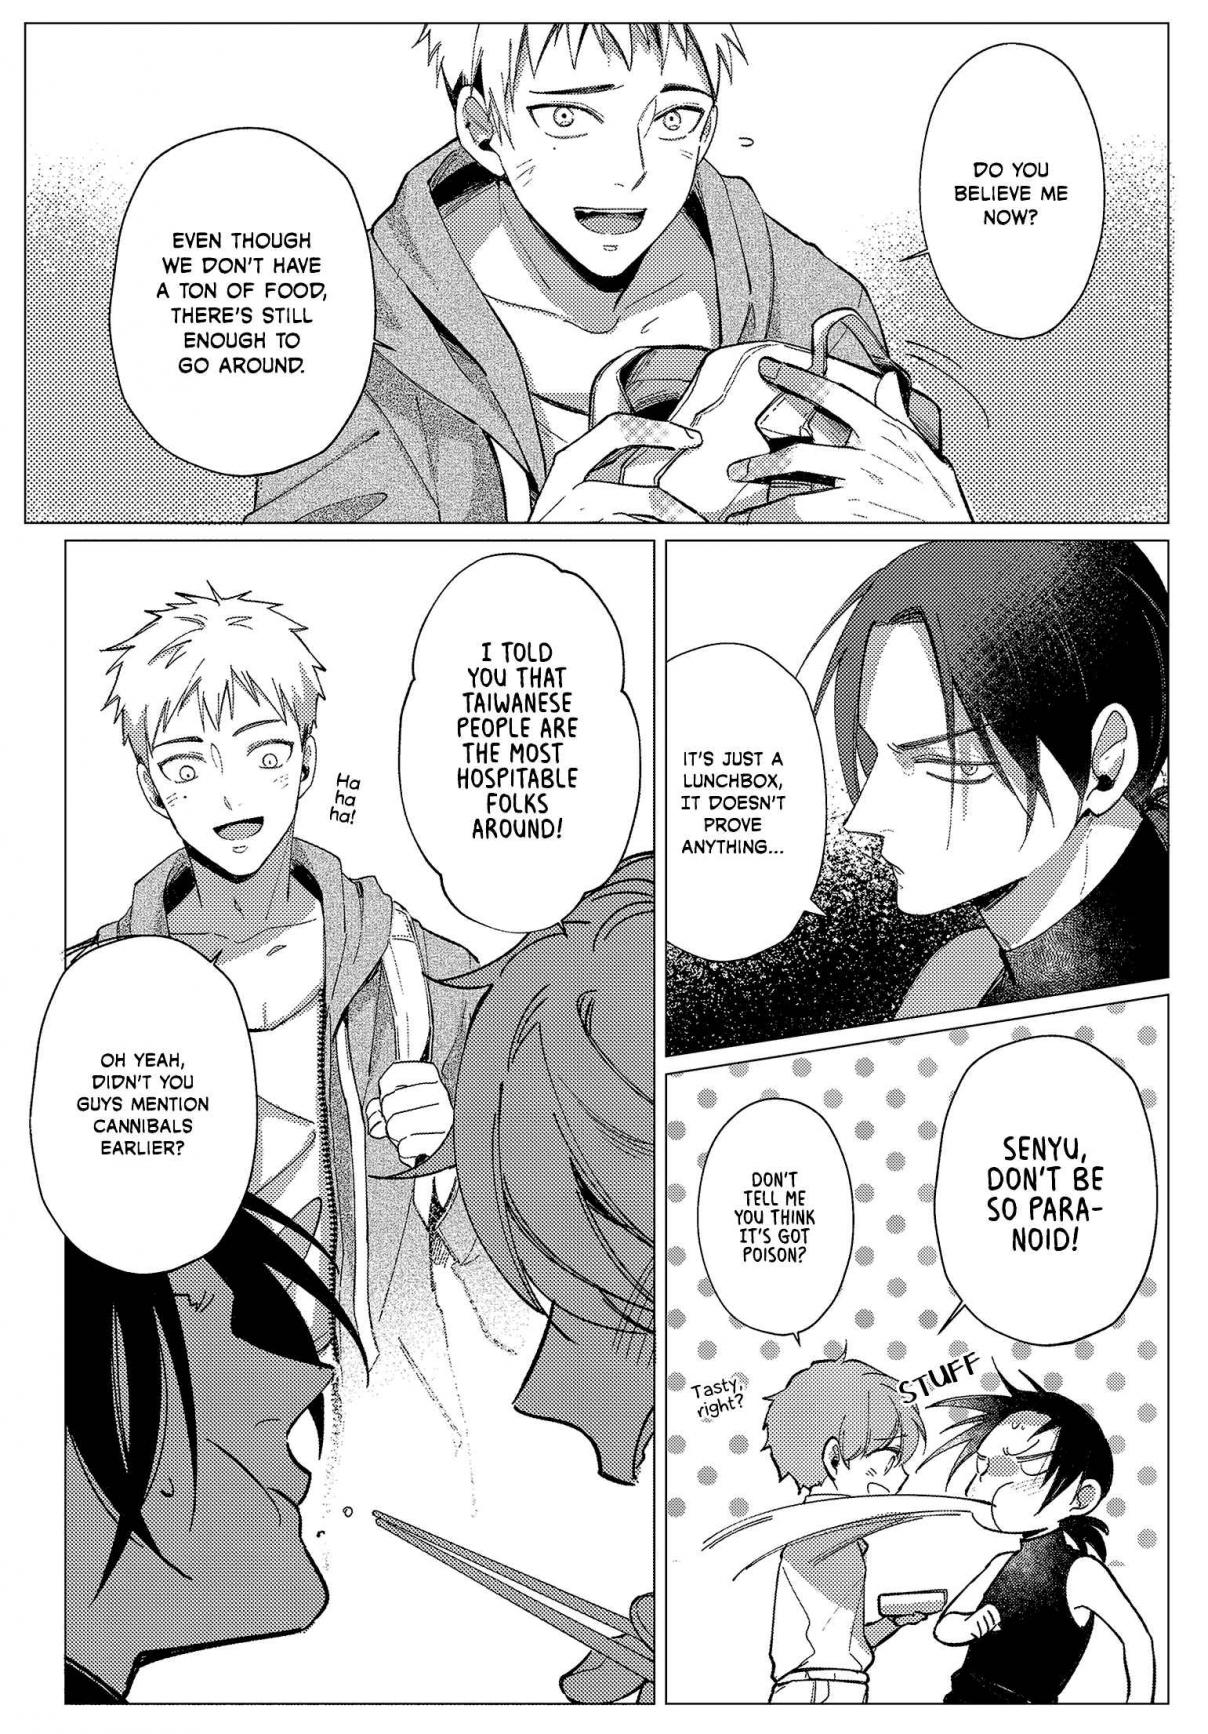 At The End Of The World, I Still Want To Be With You Vol. 1 Ch. 3